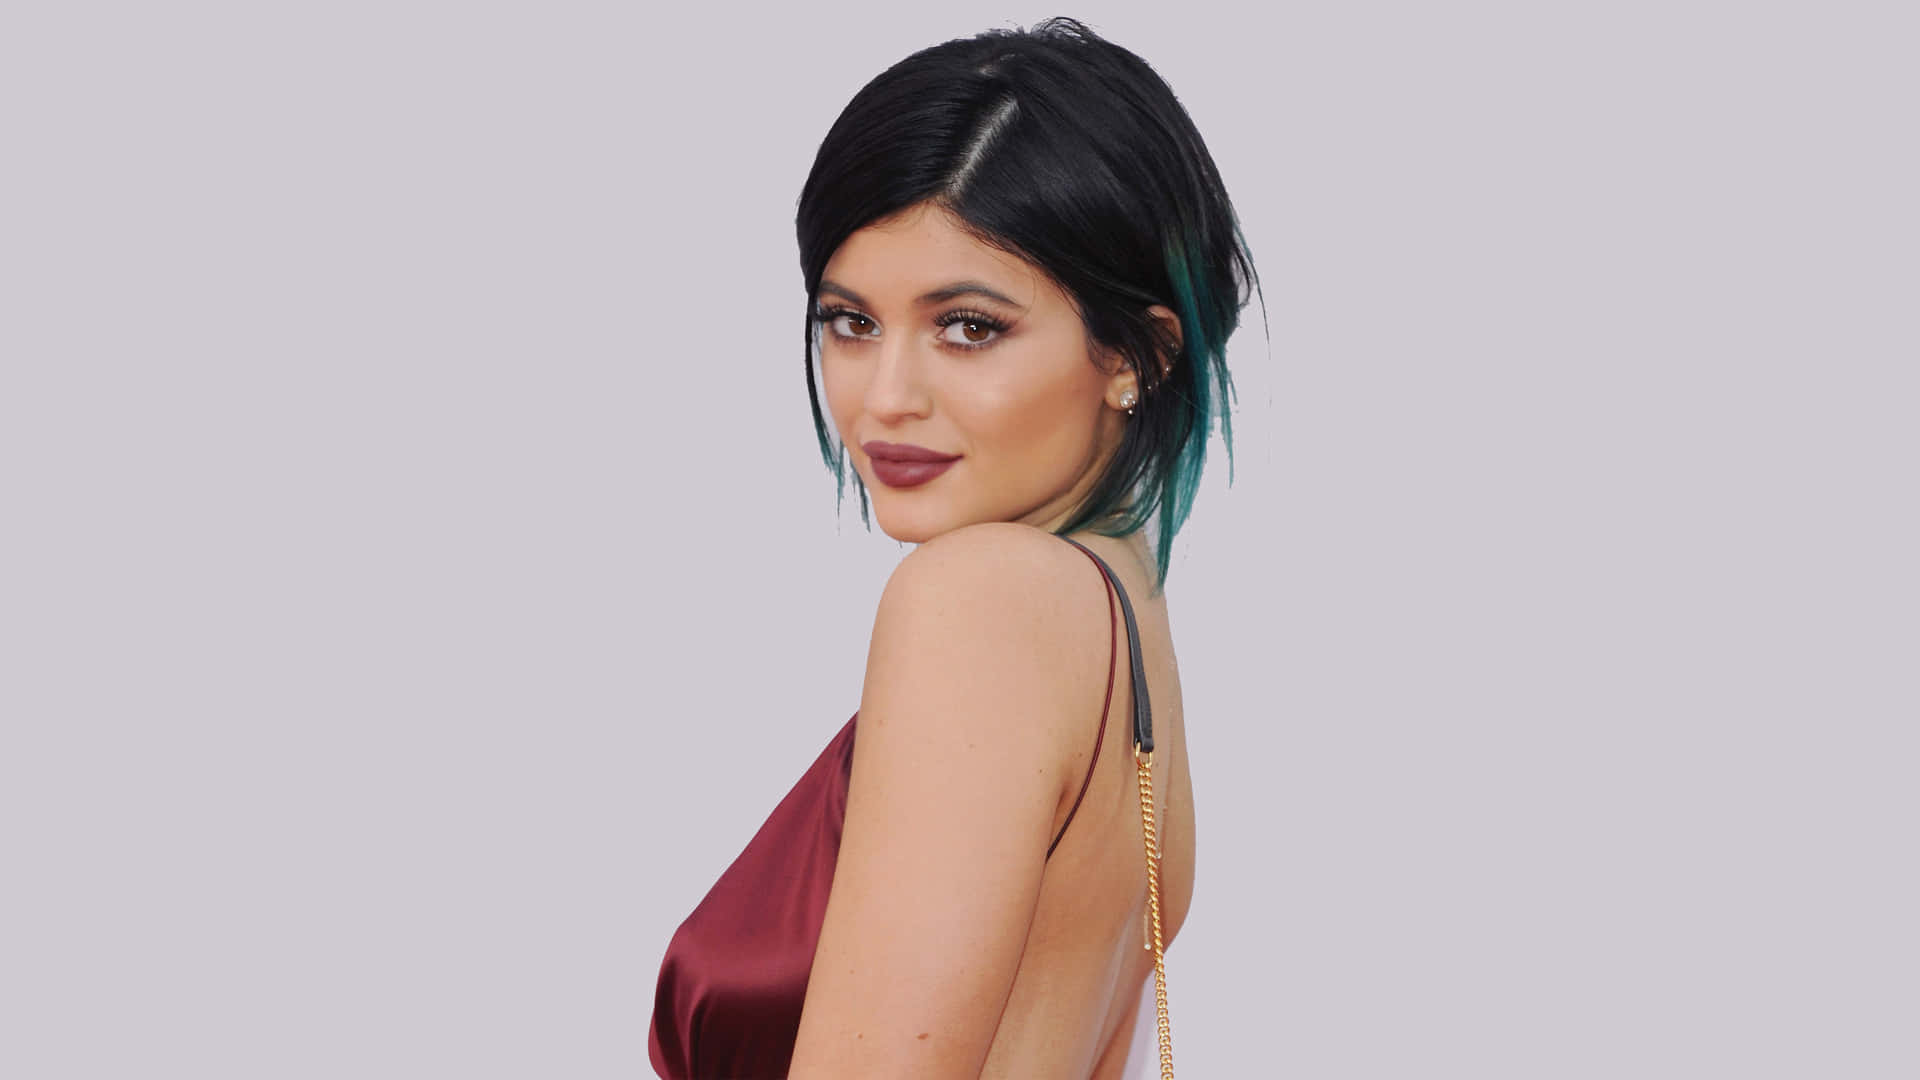 Kyliejenner Stupisce In Un Favoloso Outfit Rosa. Sfondo